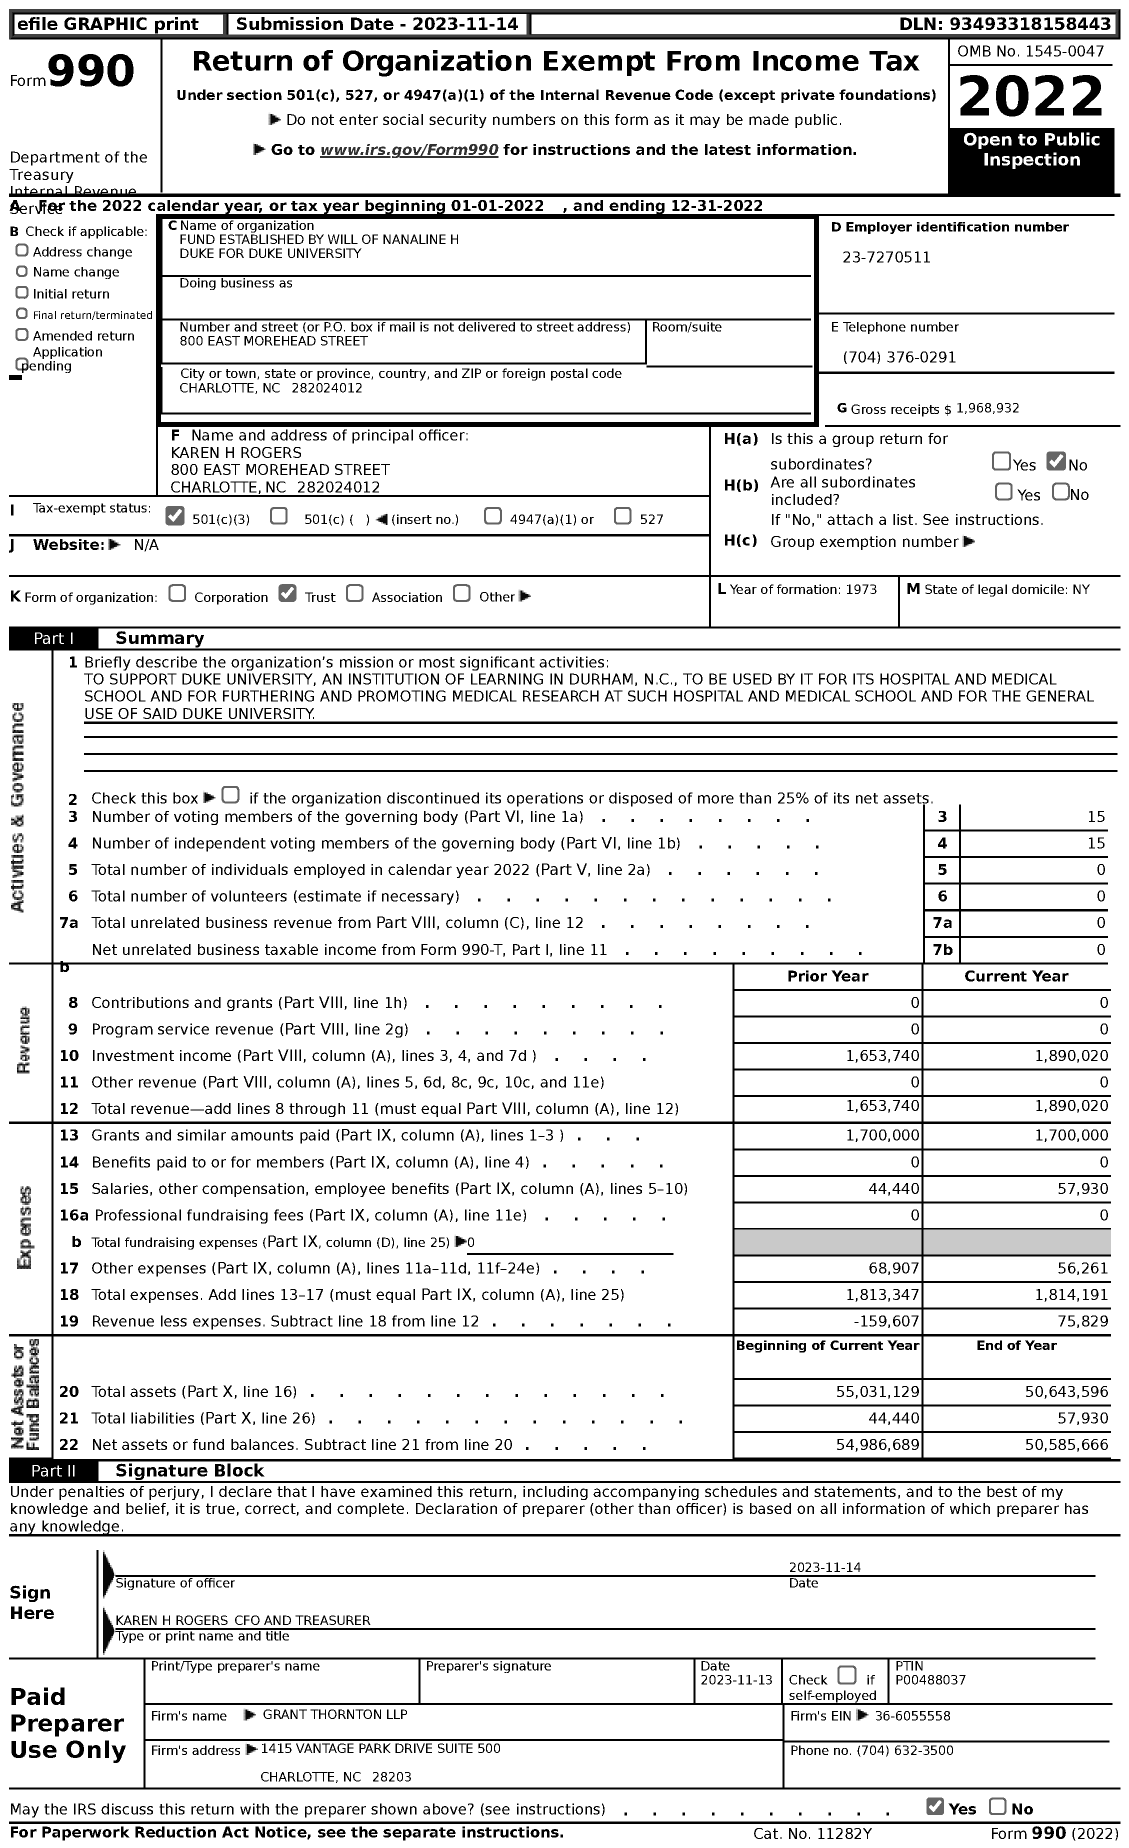 Image of first page of 2022 Form 990 for Fund Established By Will of Nanaline H Duke For Duke University